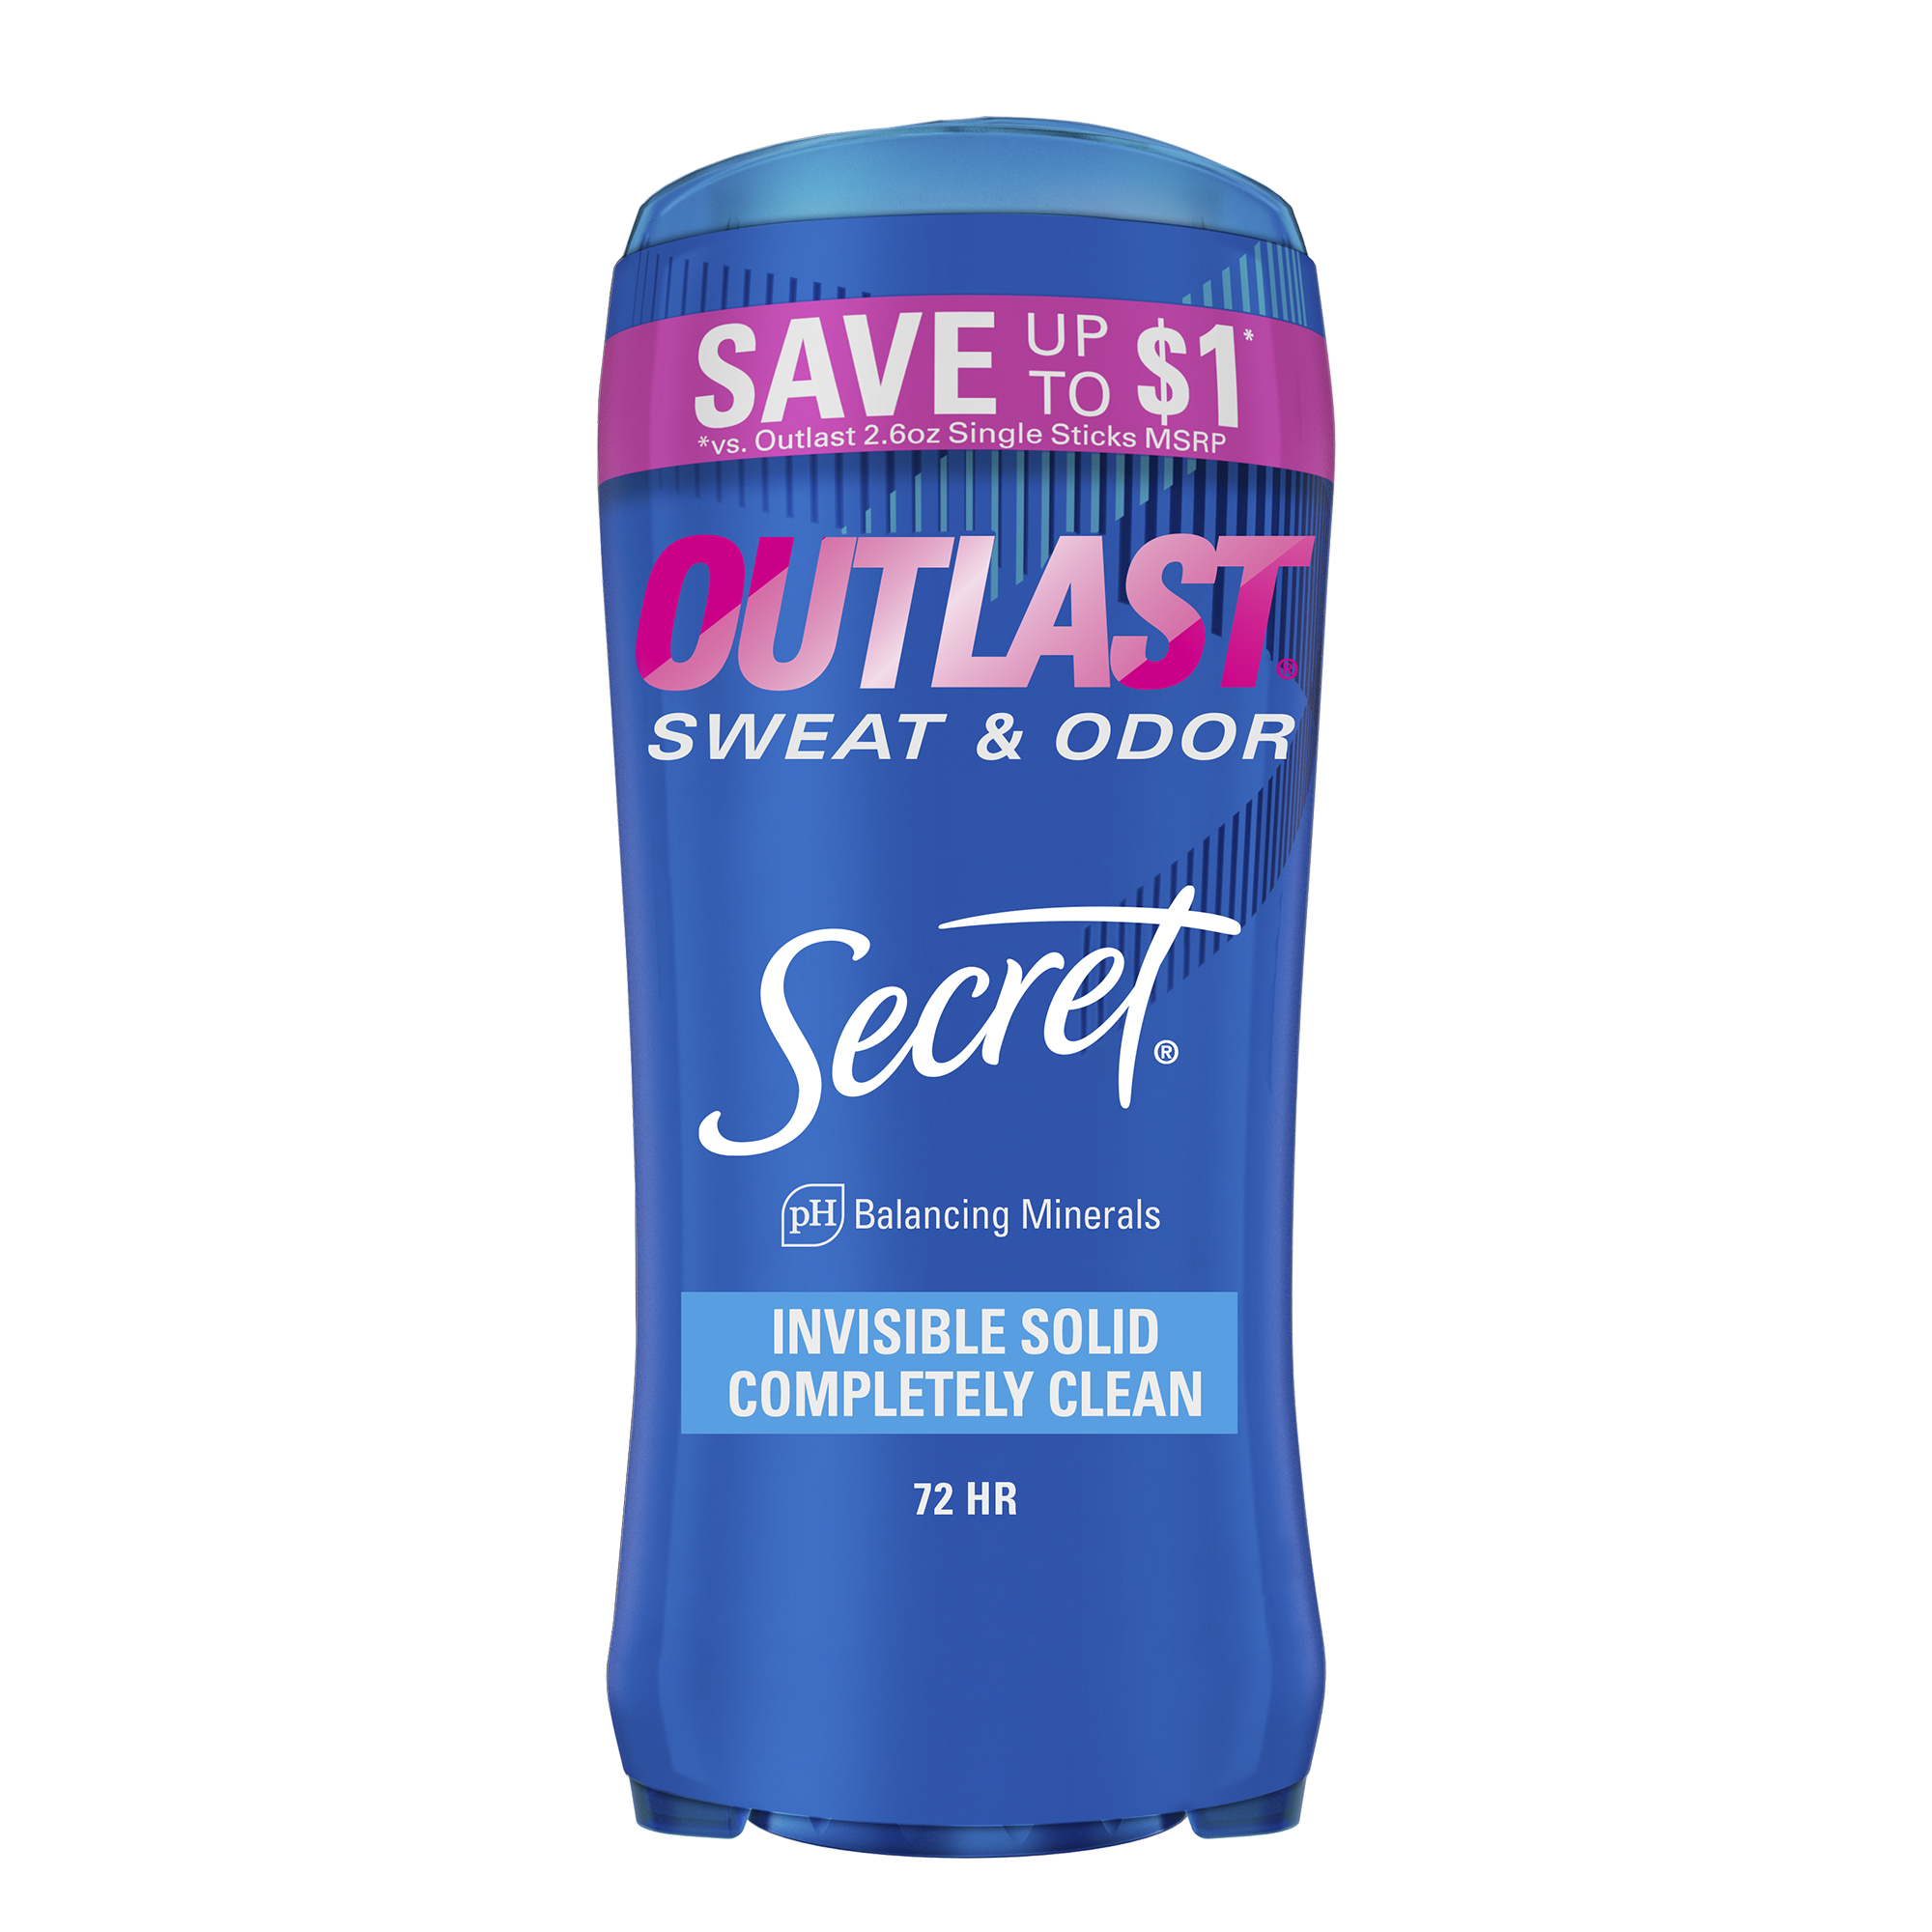 Secret Outlast Invisible Solid Antiperspirant and Deodorant Completely Clean, 2.6 oz Pack of 2 - image 1 of 9